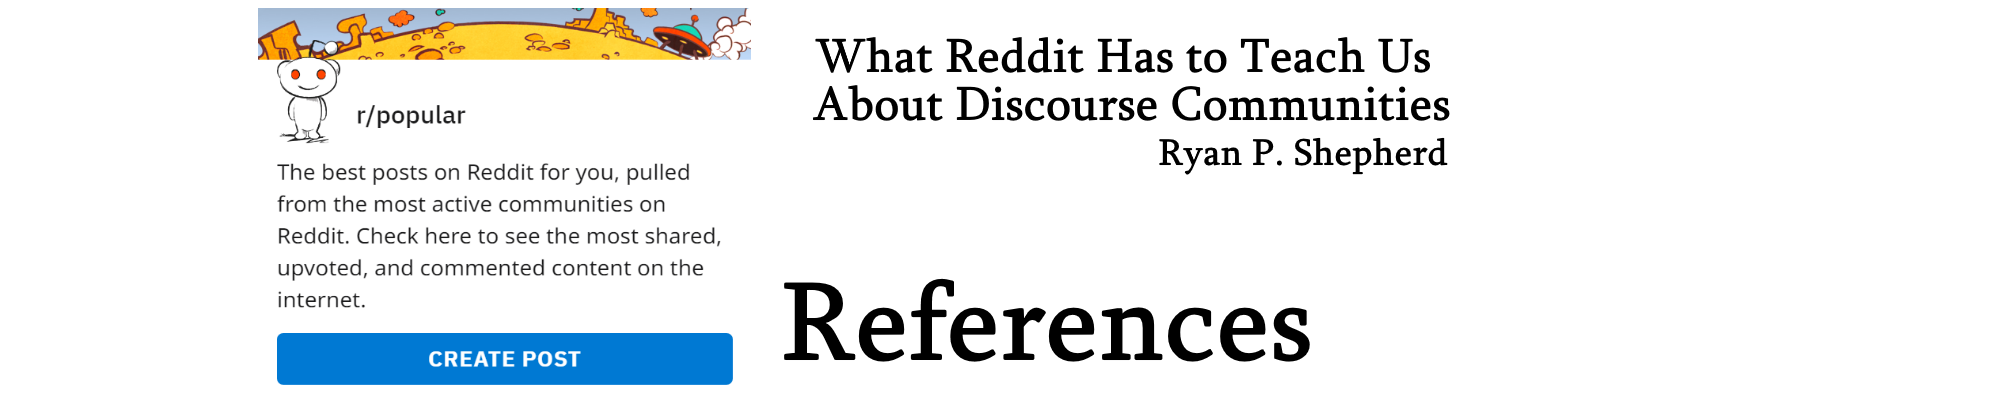 What Reddit Has to Teach Us About Discourse Communities